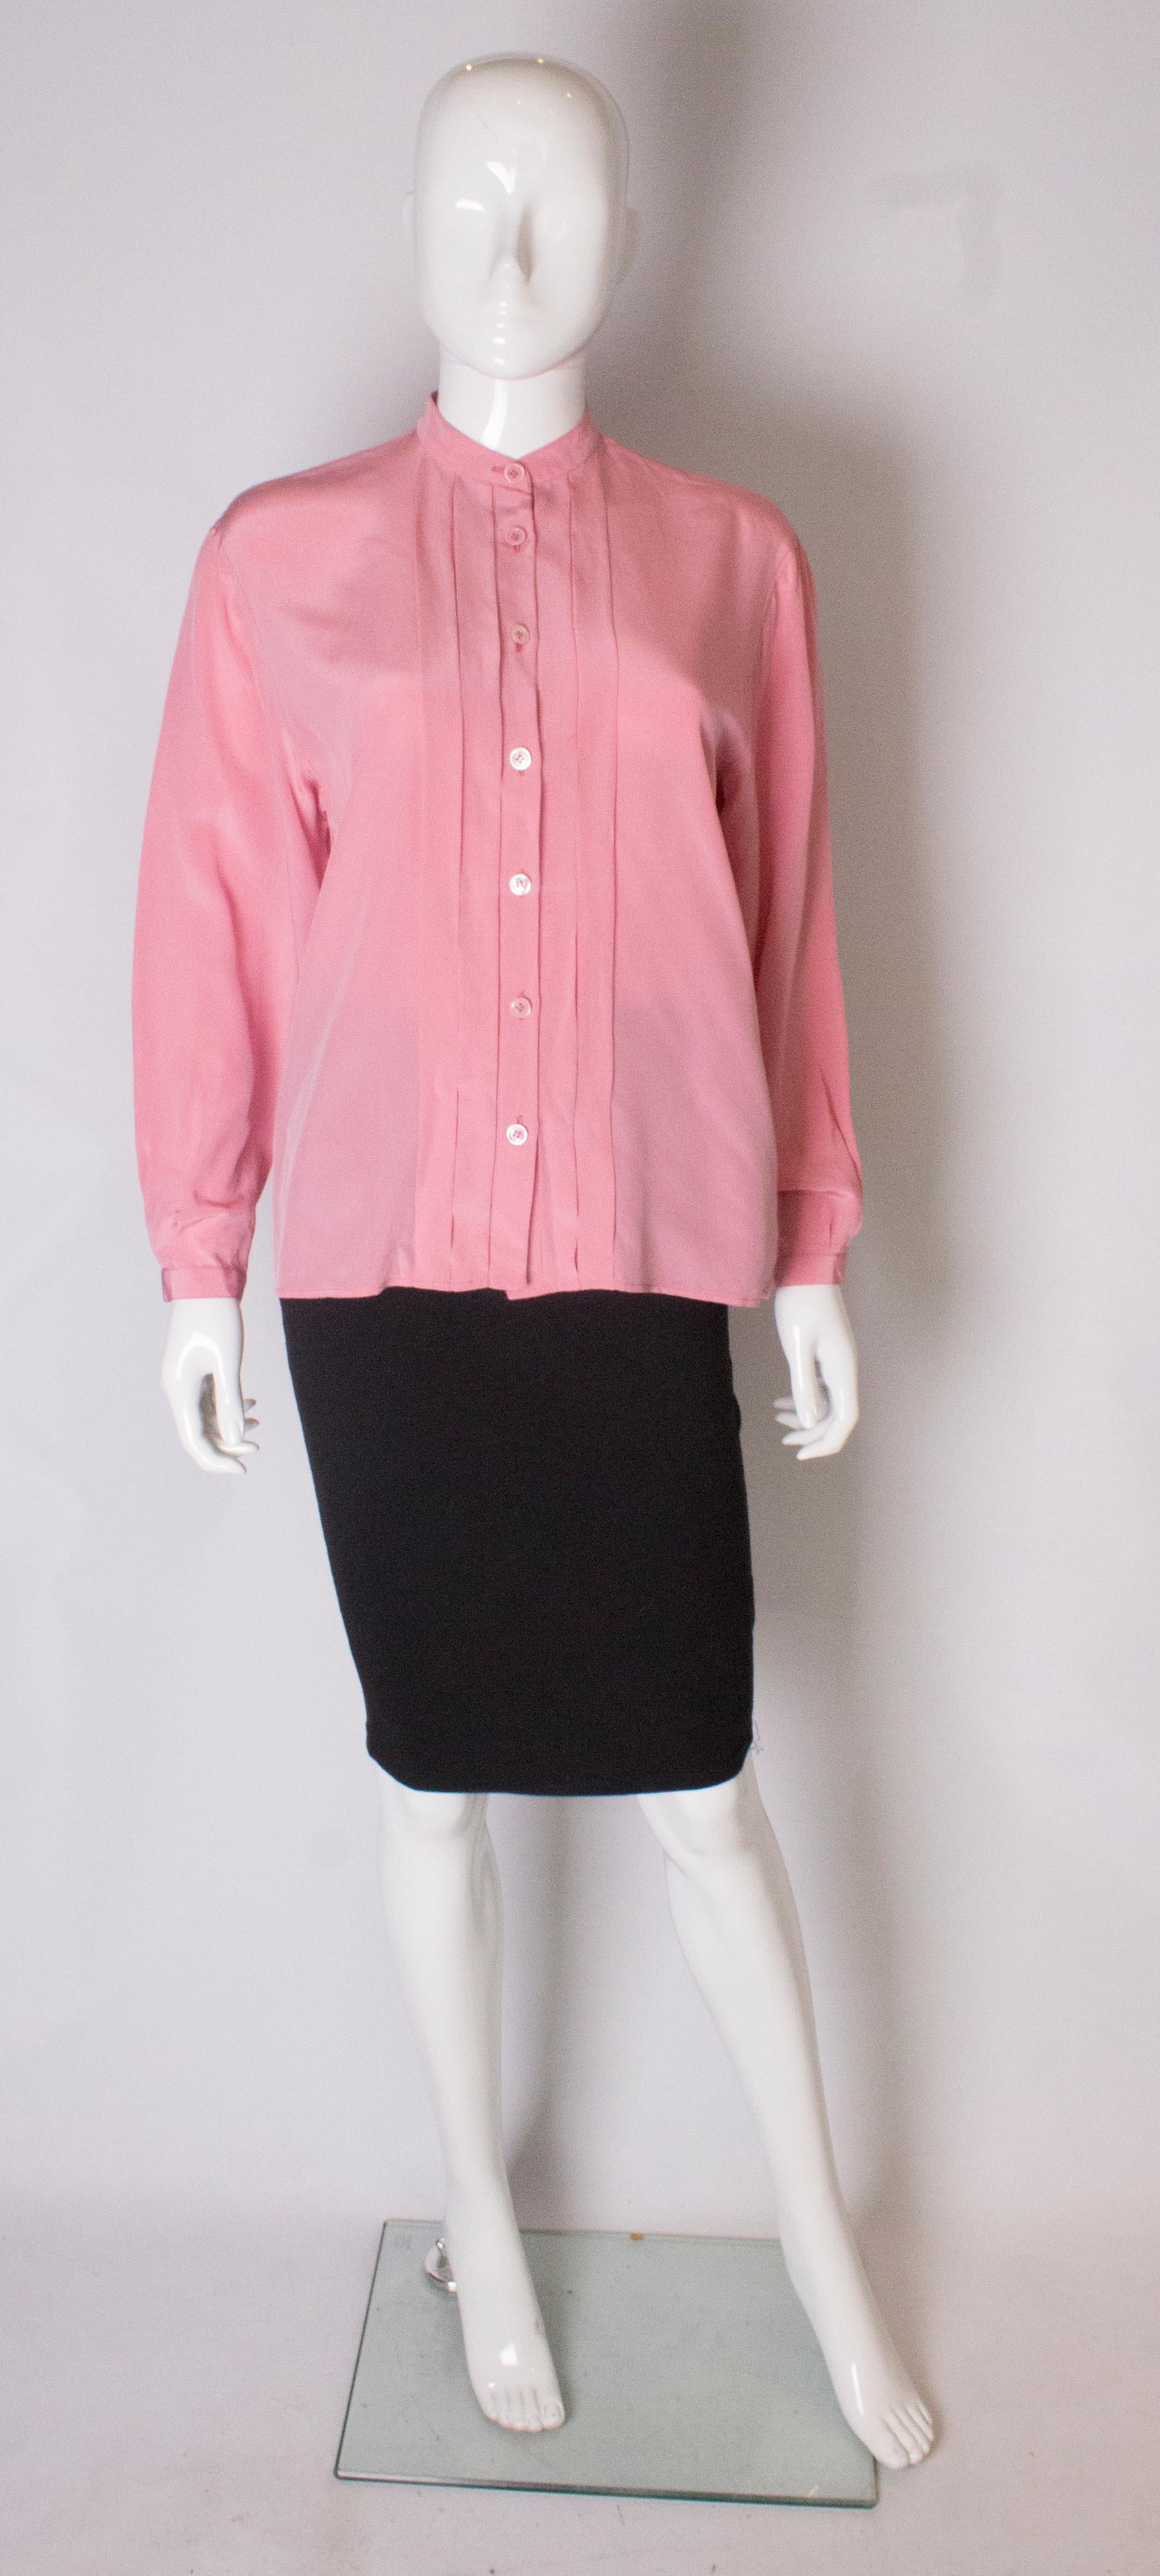 A pretty pink silk vintage blouse by Yves Saint Laurent,  Rive Gauche line. The blouse has central pleats on the  front and back and single button cuffs